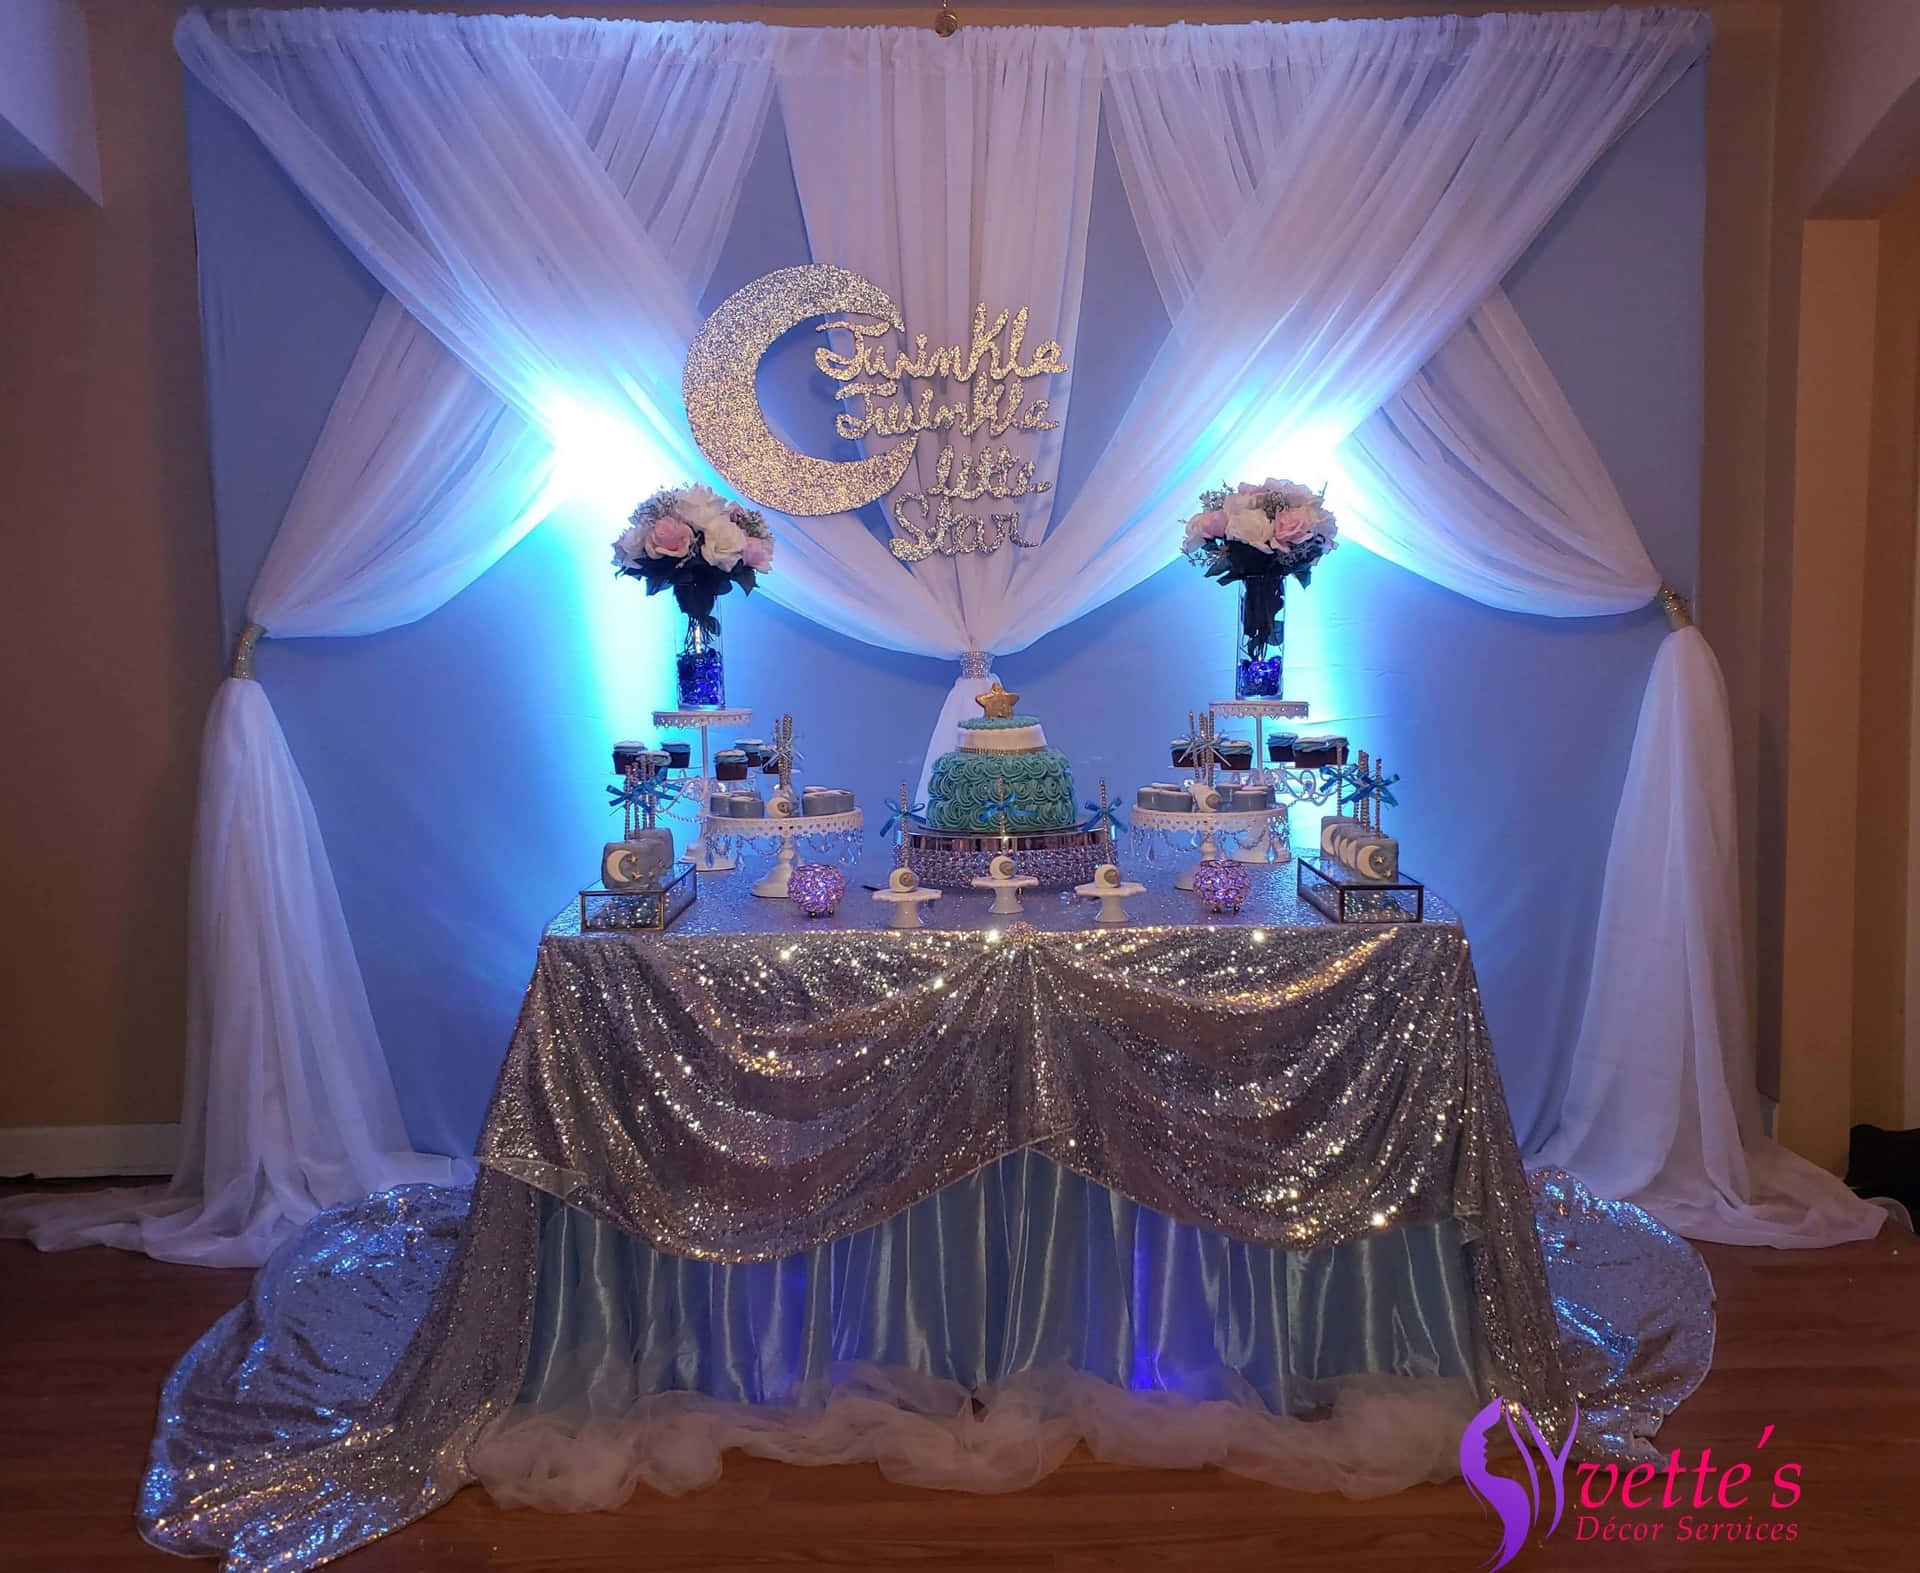 Celebrate your Quinceanera with this beautiful floral backdrop